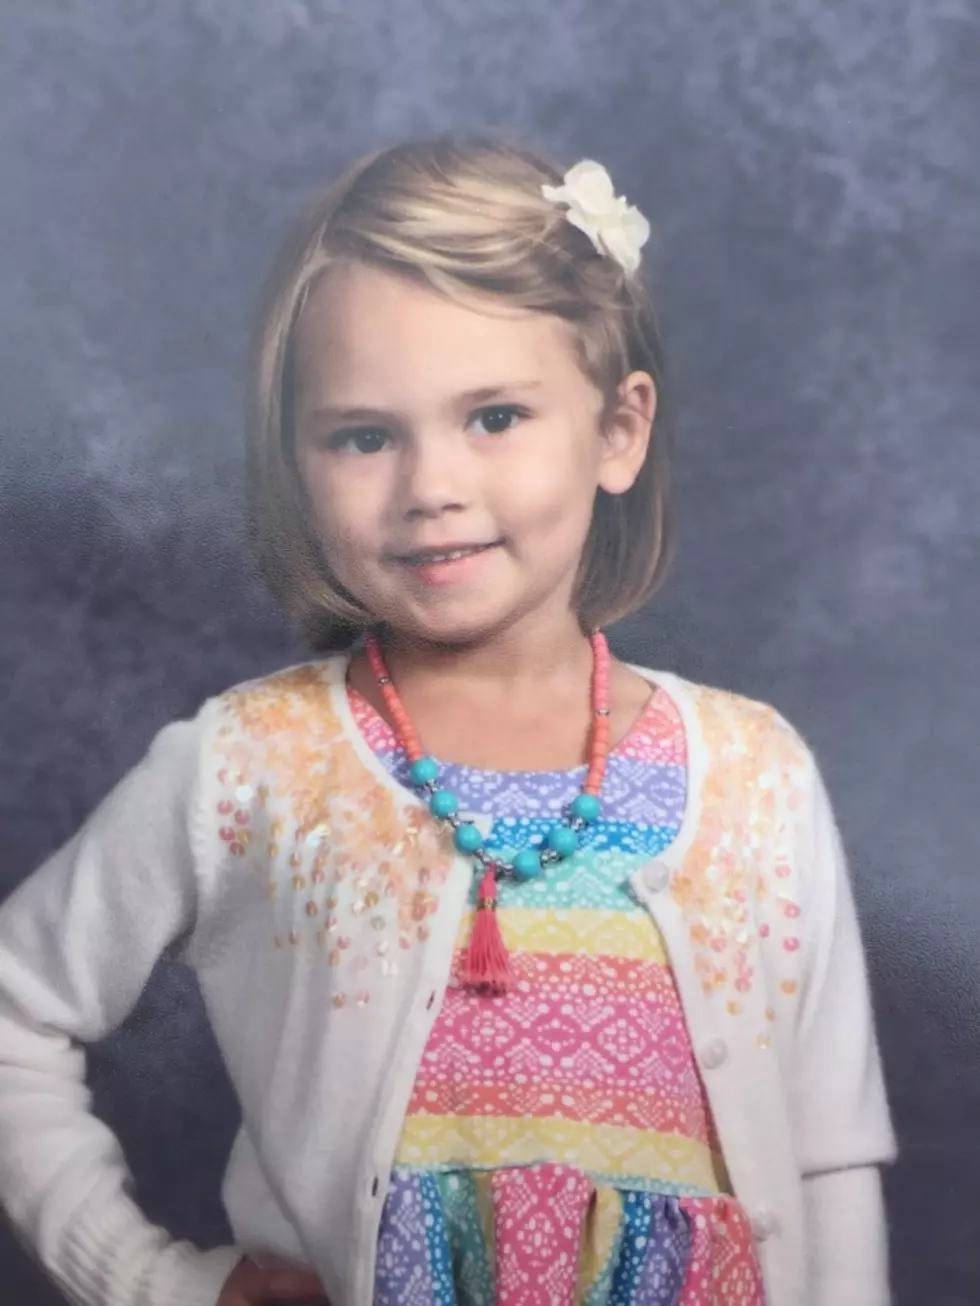 Fund Established to Help The Family of 5-Year-Old Alayna Ertle